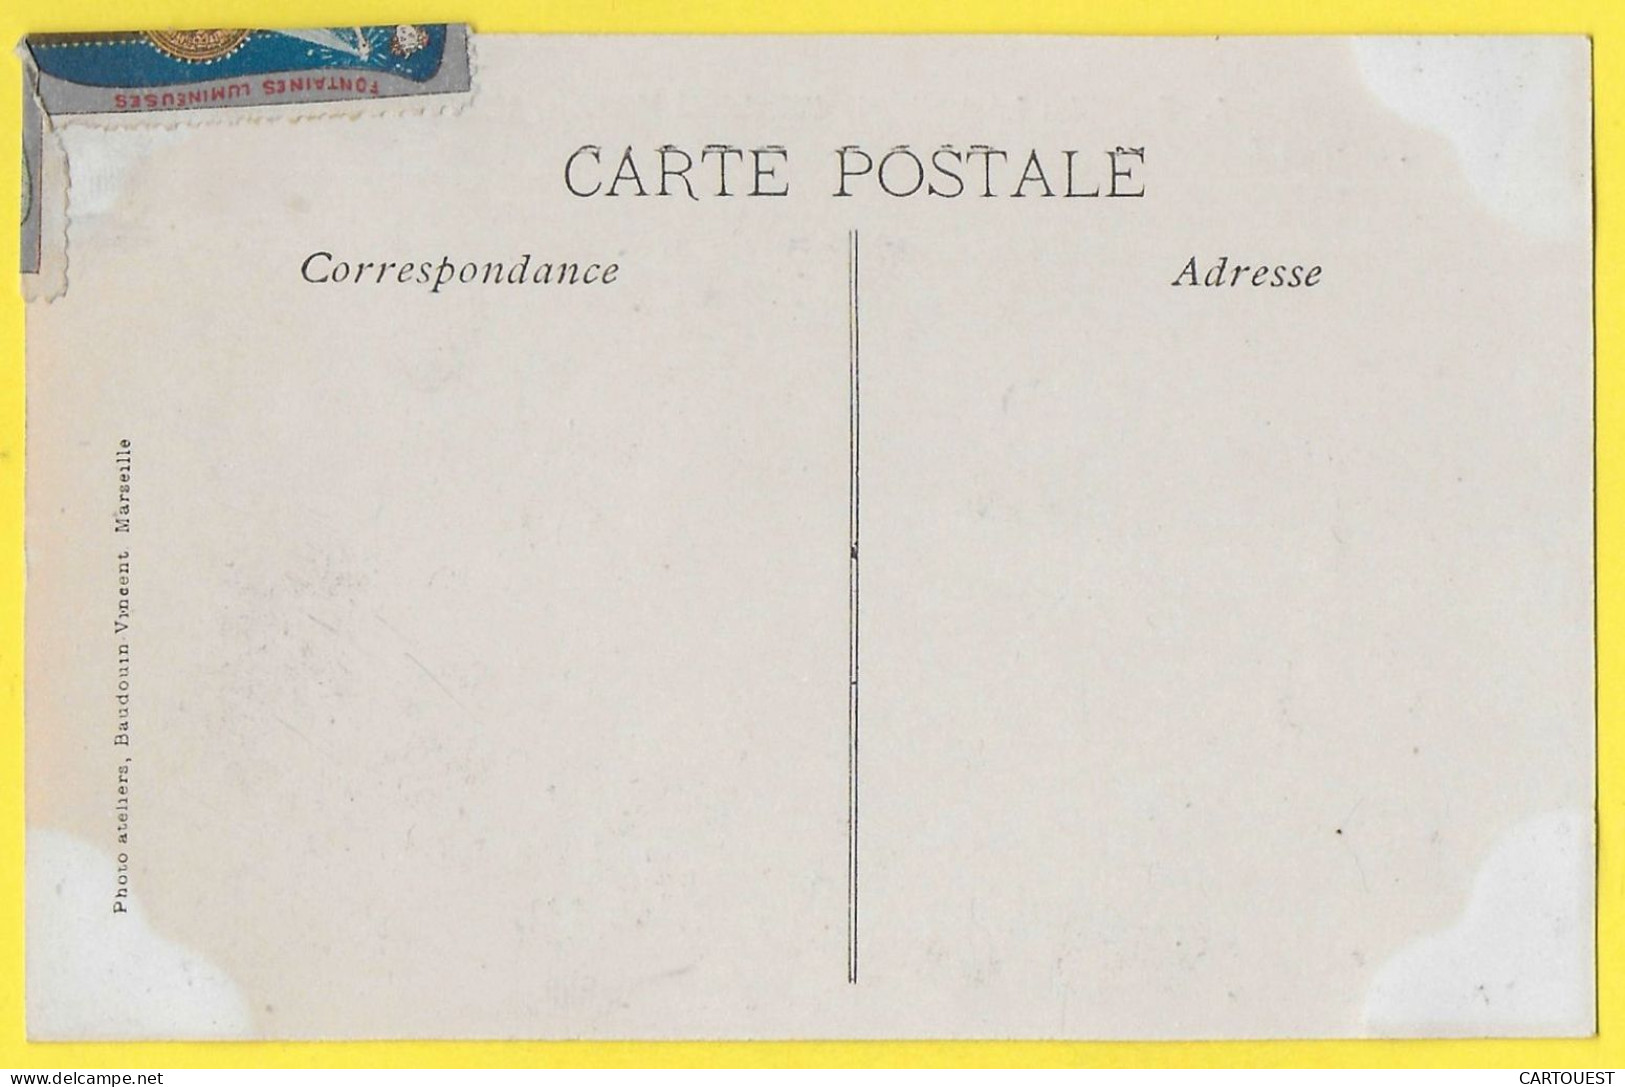 CPA MARSEILLE Exposition Internationale D'Electricité, Les Fontaines Lumineuses - Timbres - Electrical Trade Shows And Other